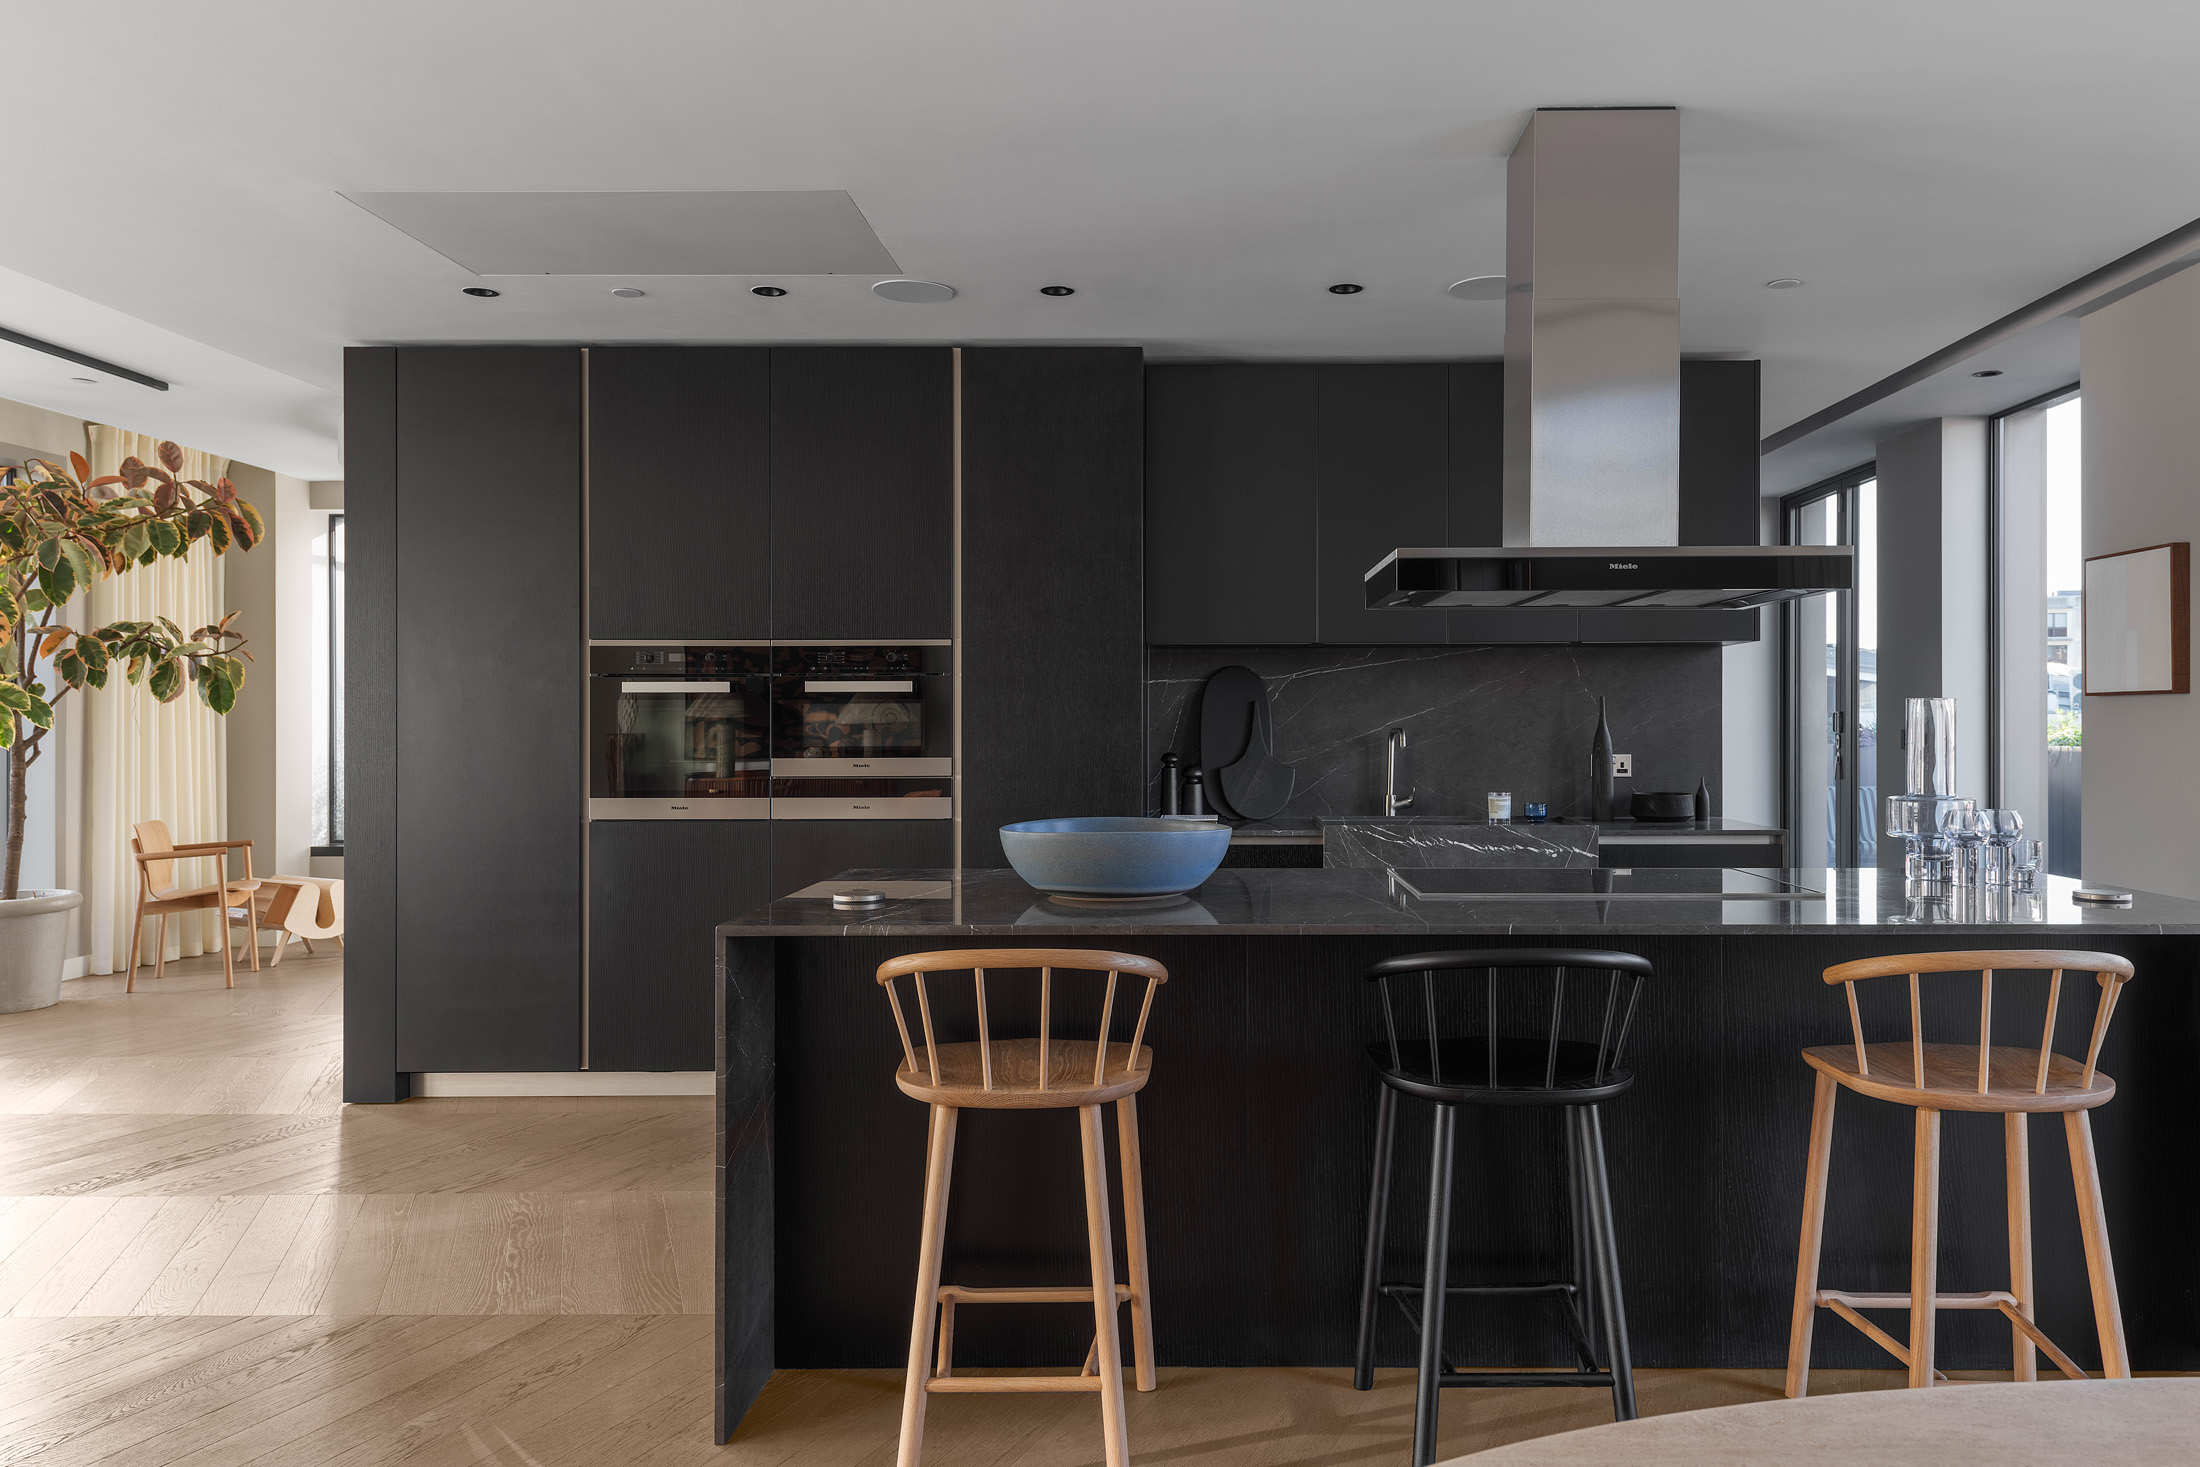 For Sale: Parker Street, Chapter House, Covent Garden WC2. Luxury kitchen with bespoke joinery